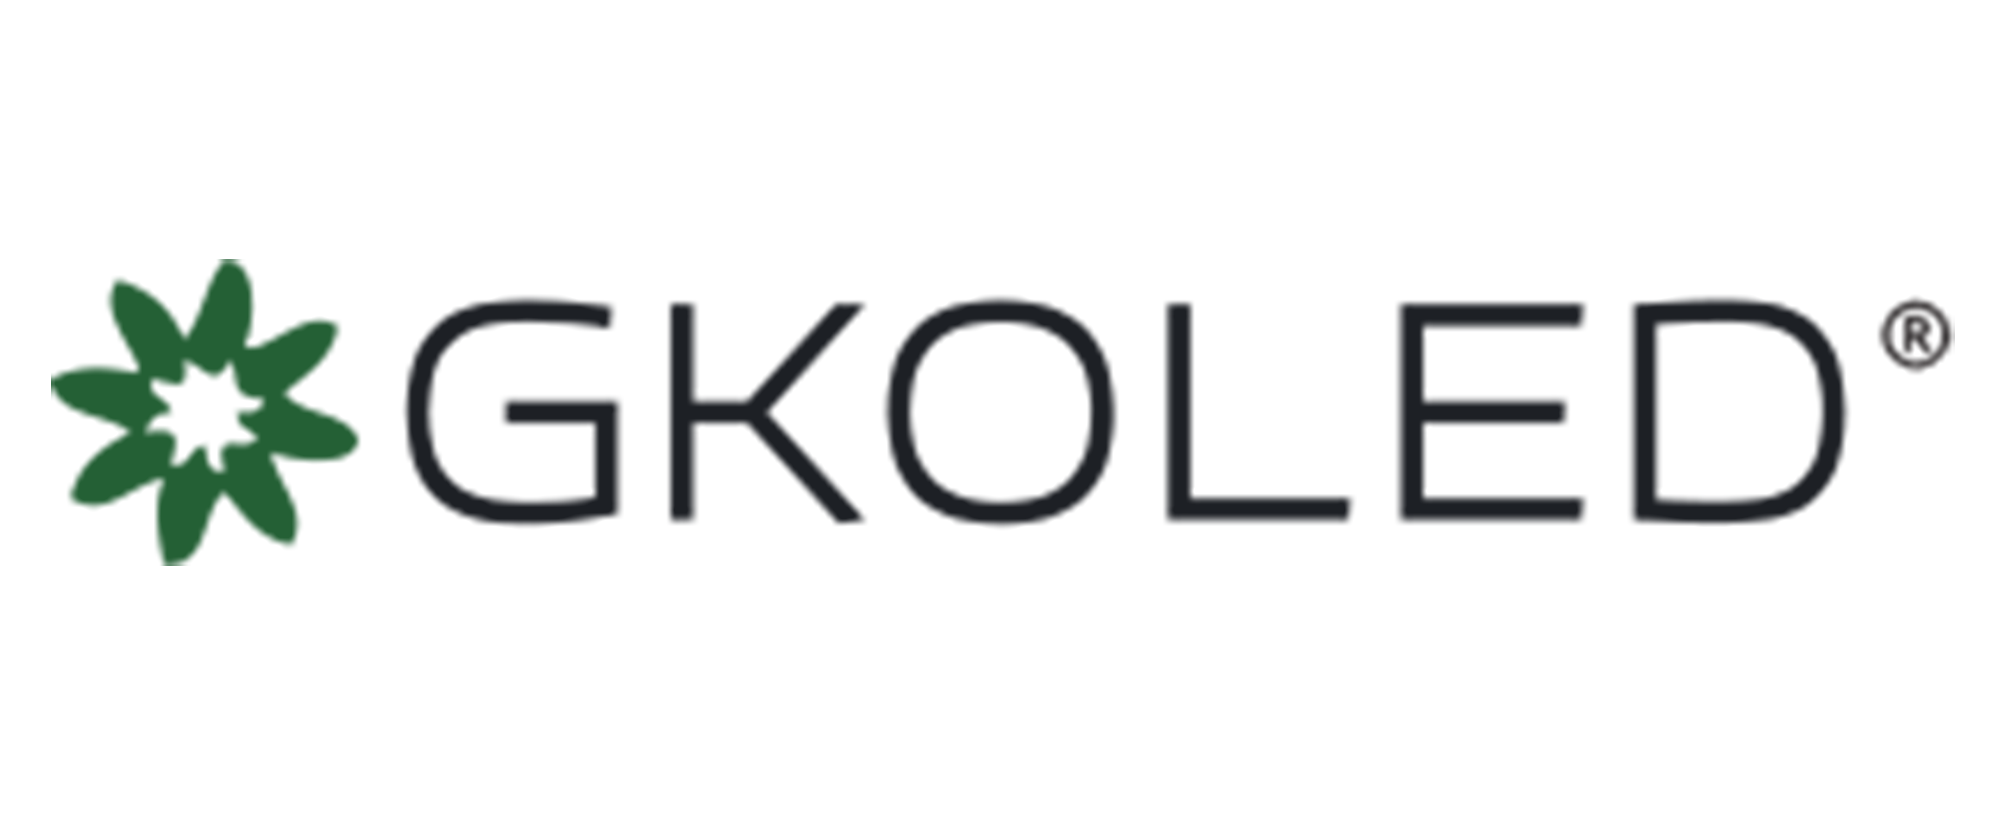 View all of our GKOLED products.